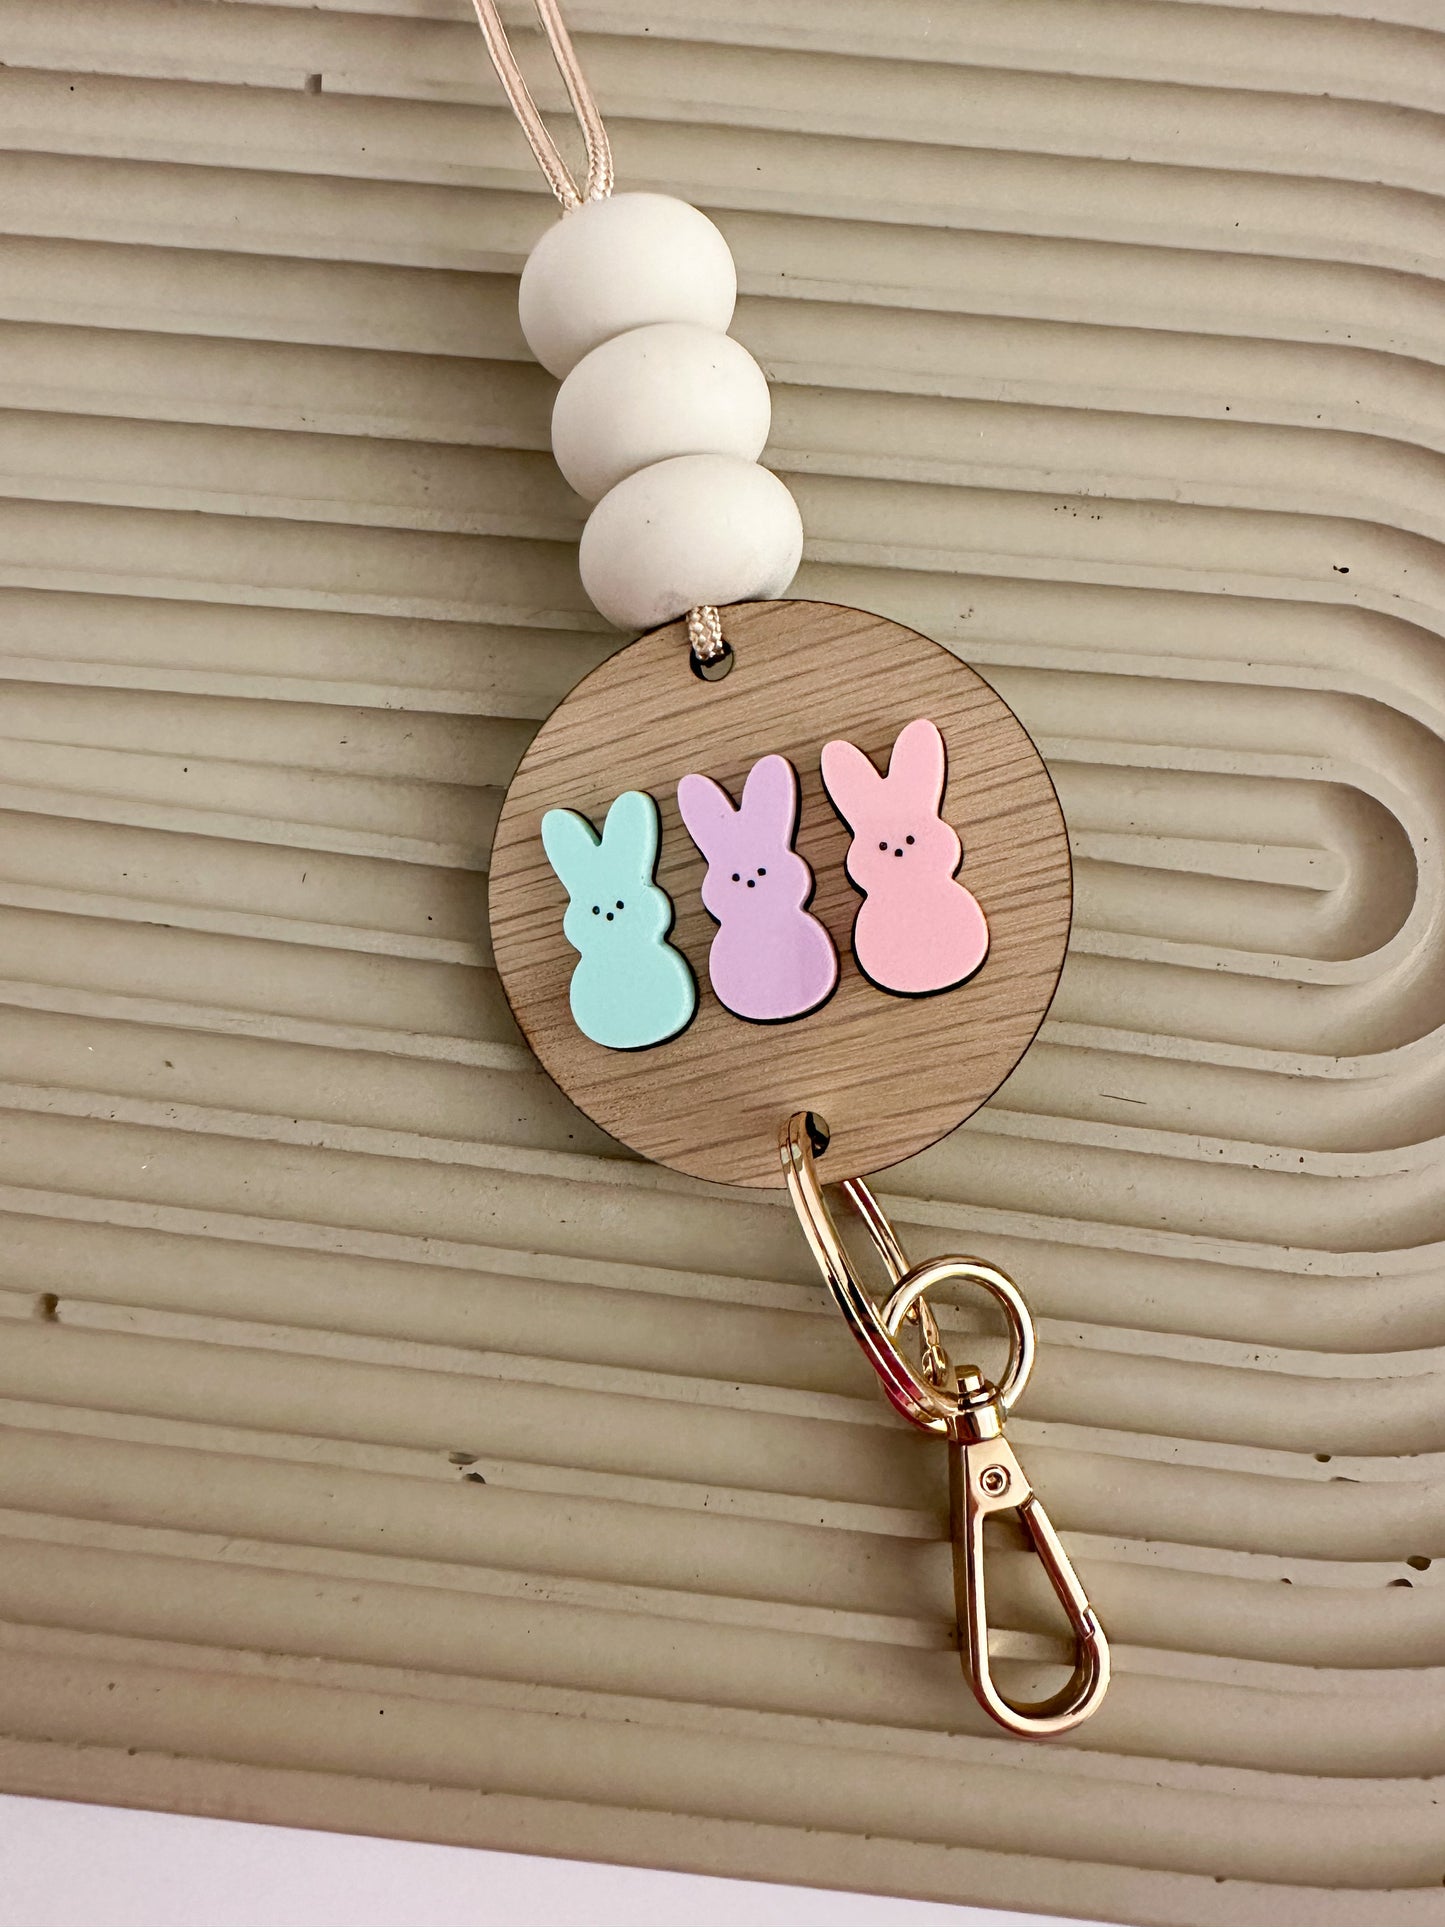 3 peep wooden lanyard / choose your color(s)